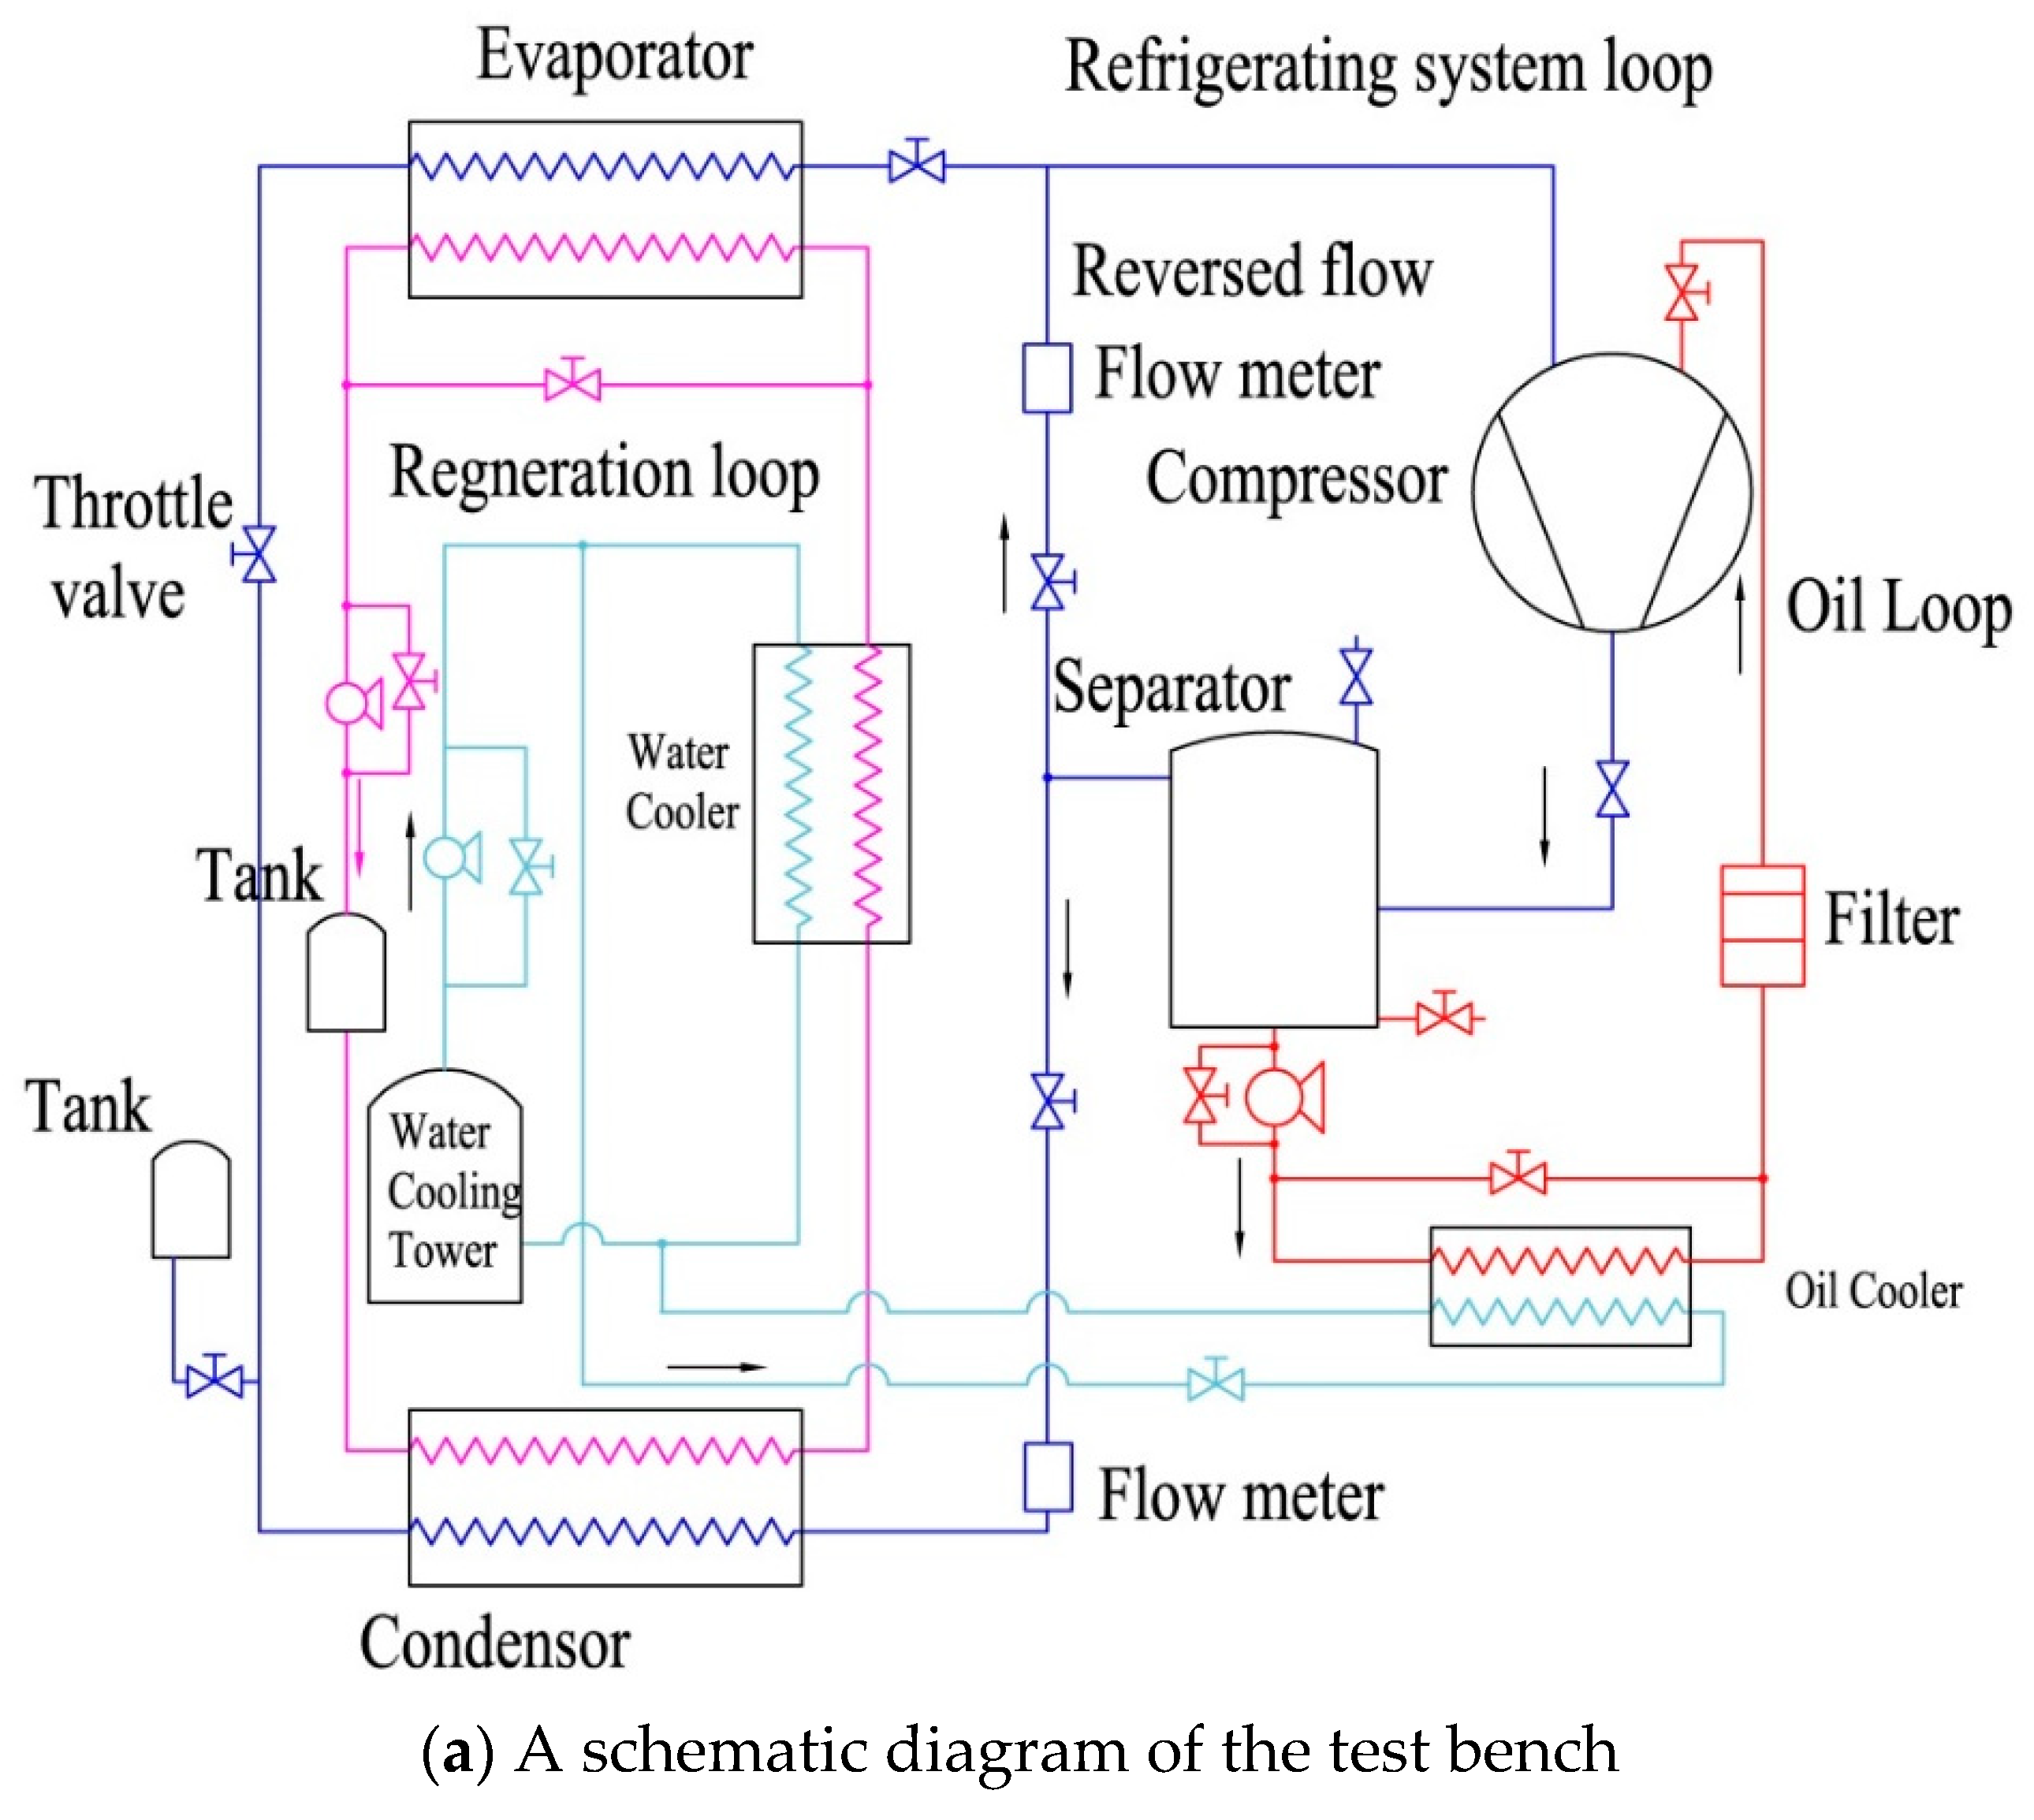 Applied Sciences | Free Full-Text | A Bench Evaluation Test for  Refrigeration Oils in a Refrigeration System Using a Screw Compressor | HTML